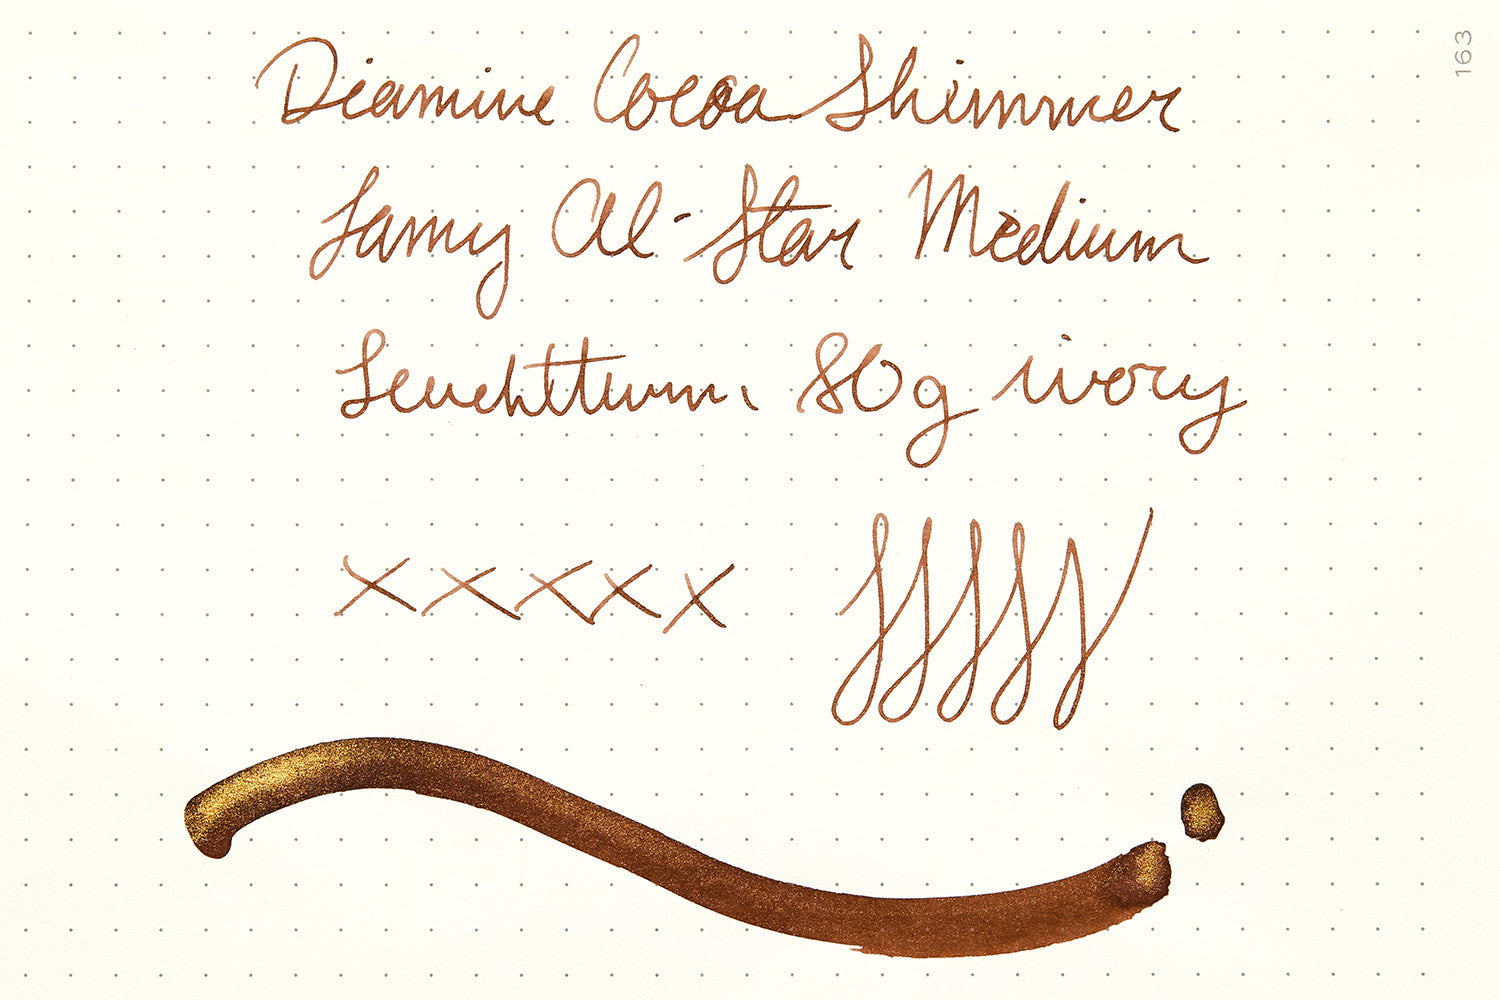 Diamine Cocoa Shimmer ink review on Leuchtturm paper